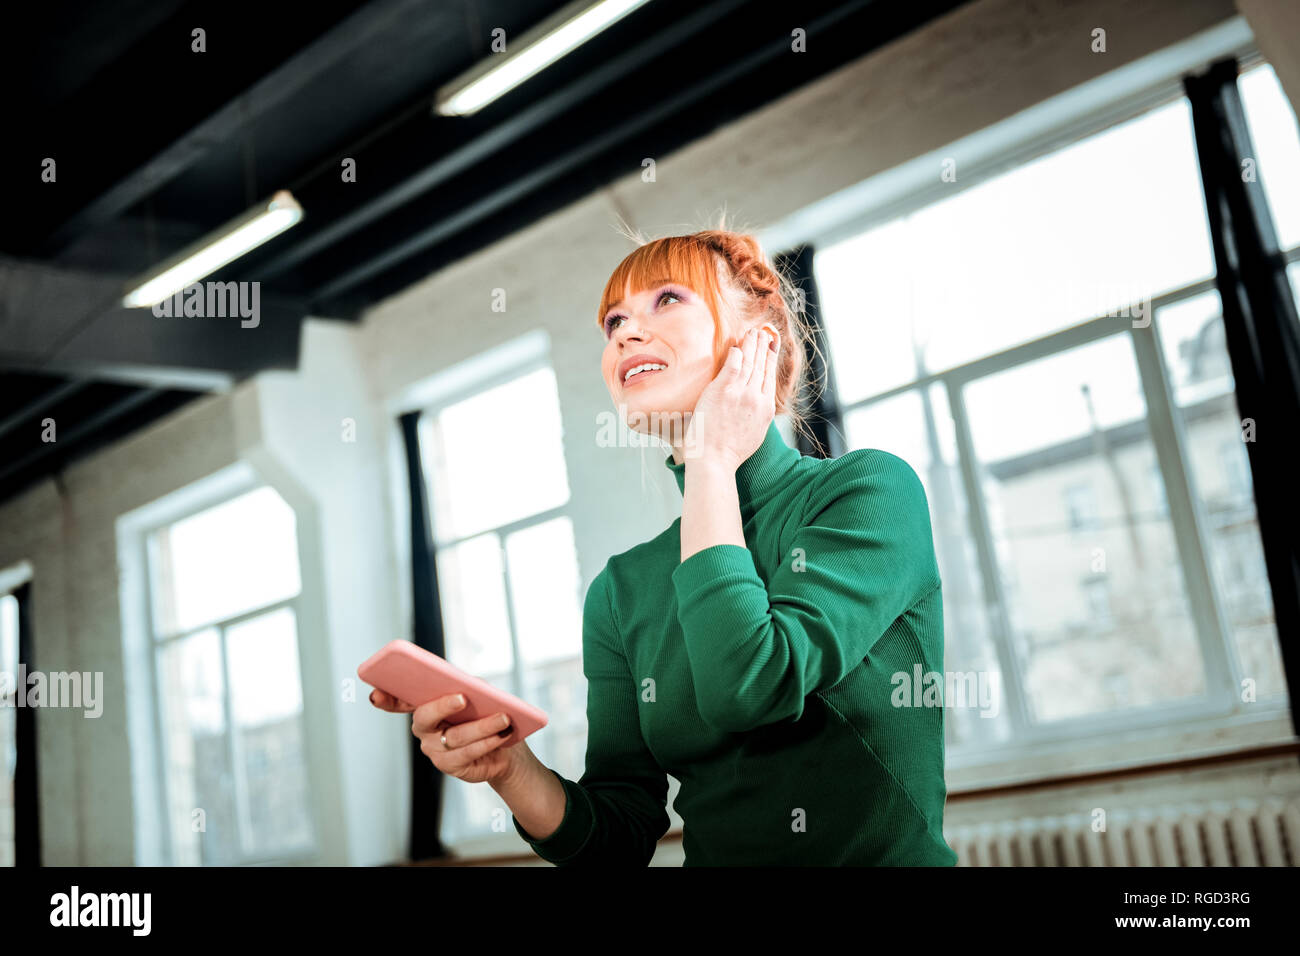 Red-haired professional yoga instructor in a green turtleneck speaking on the phone Stock Photo